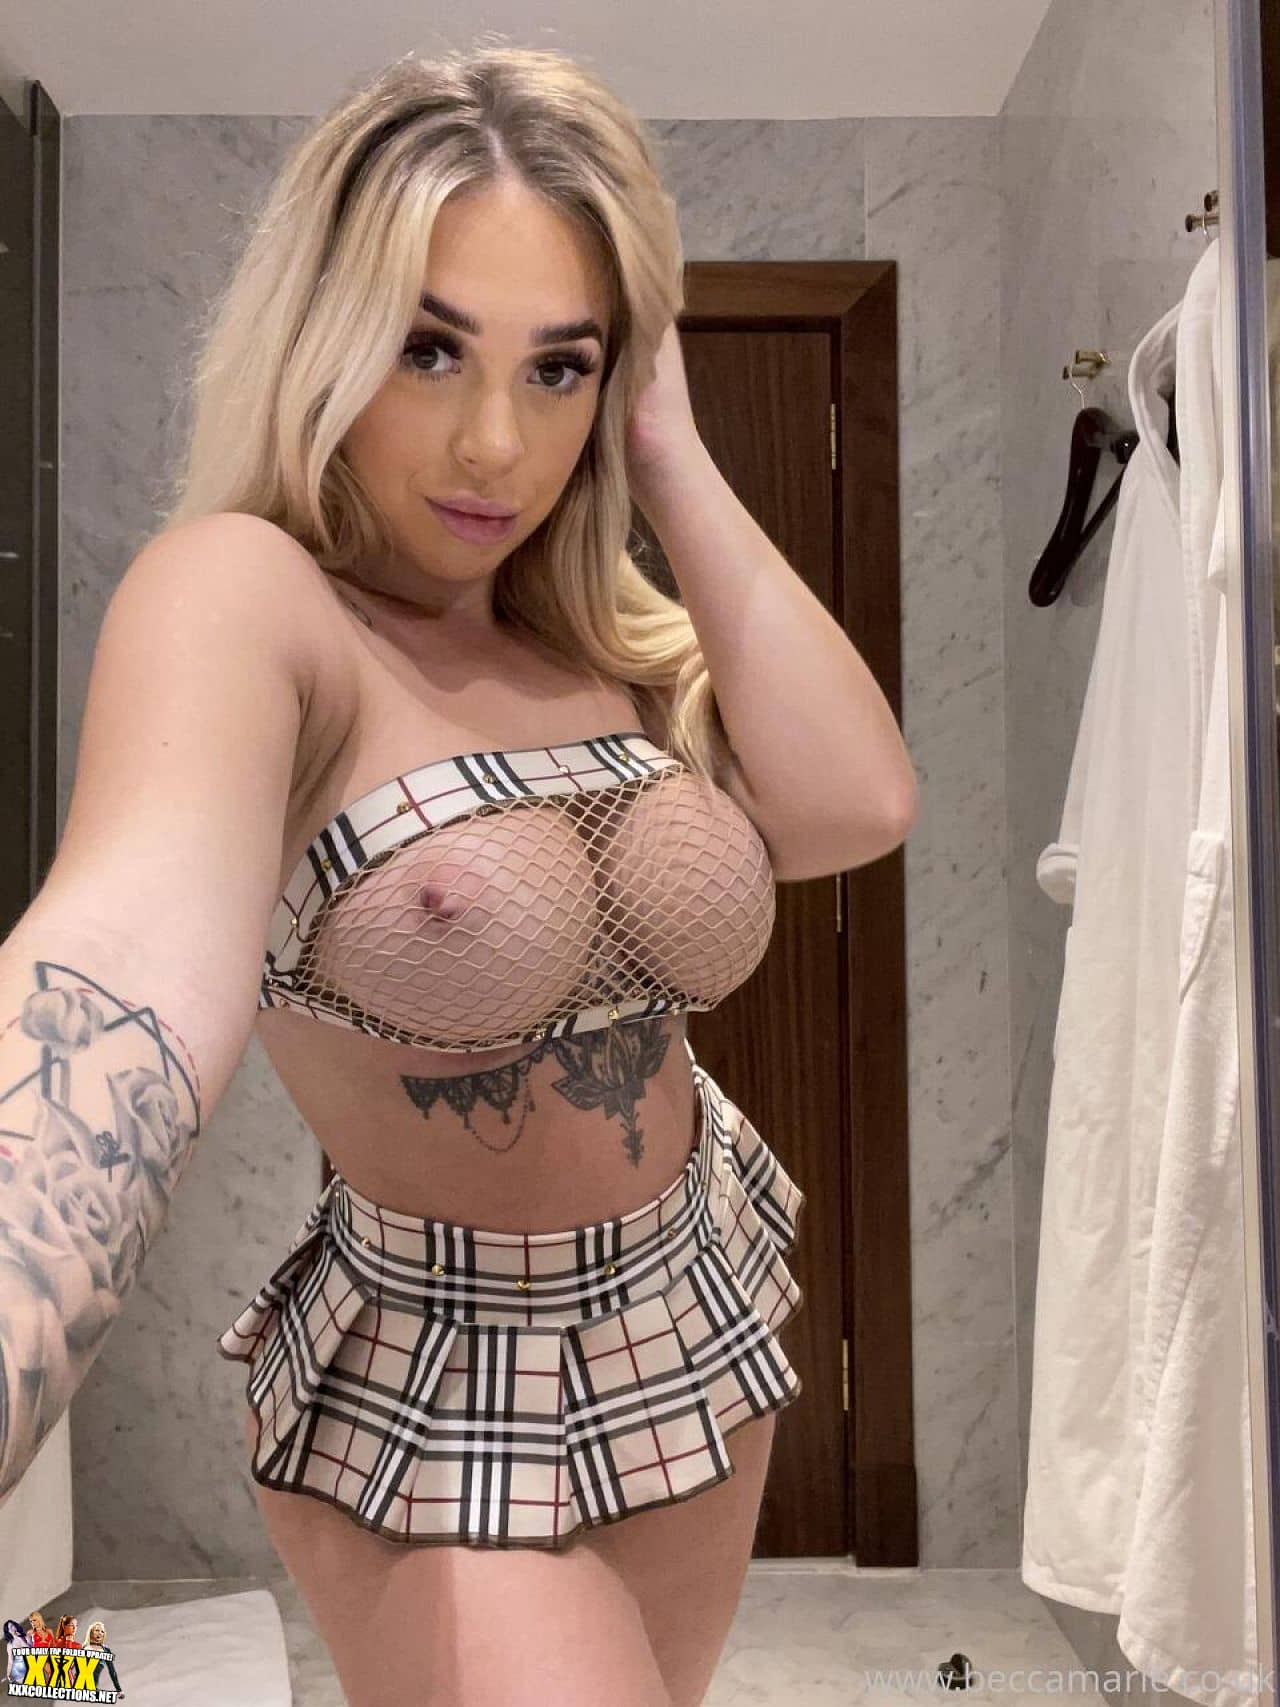 Becca Marie OnlyFans Pictures Complete Siterip Becca Marie OnlyFans 2020-.....